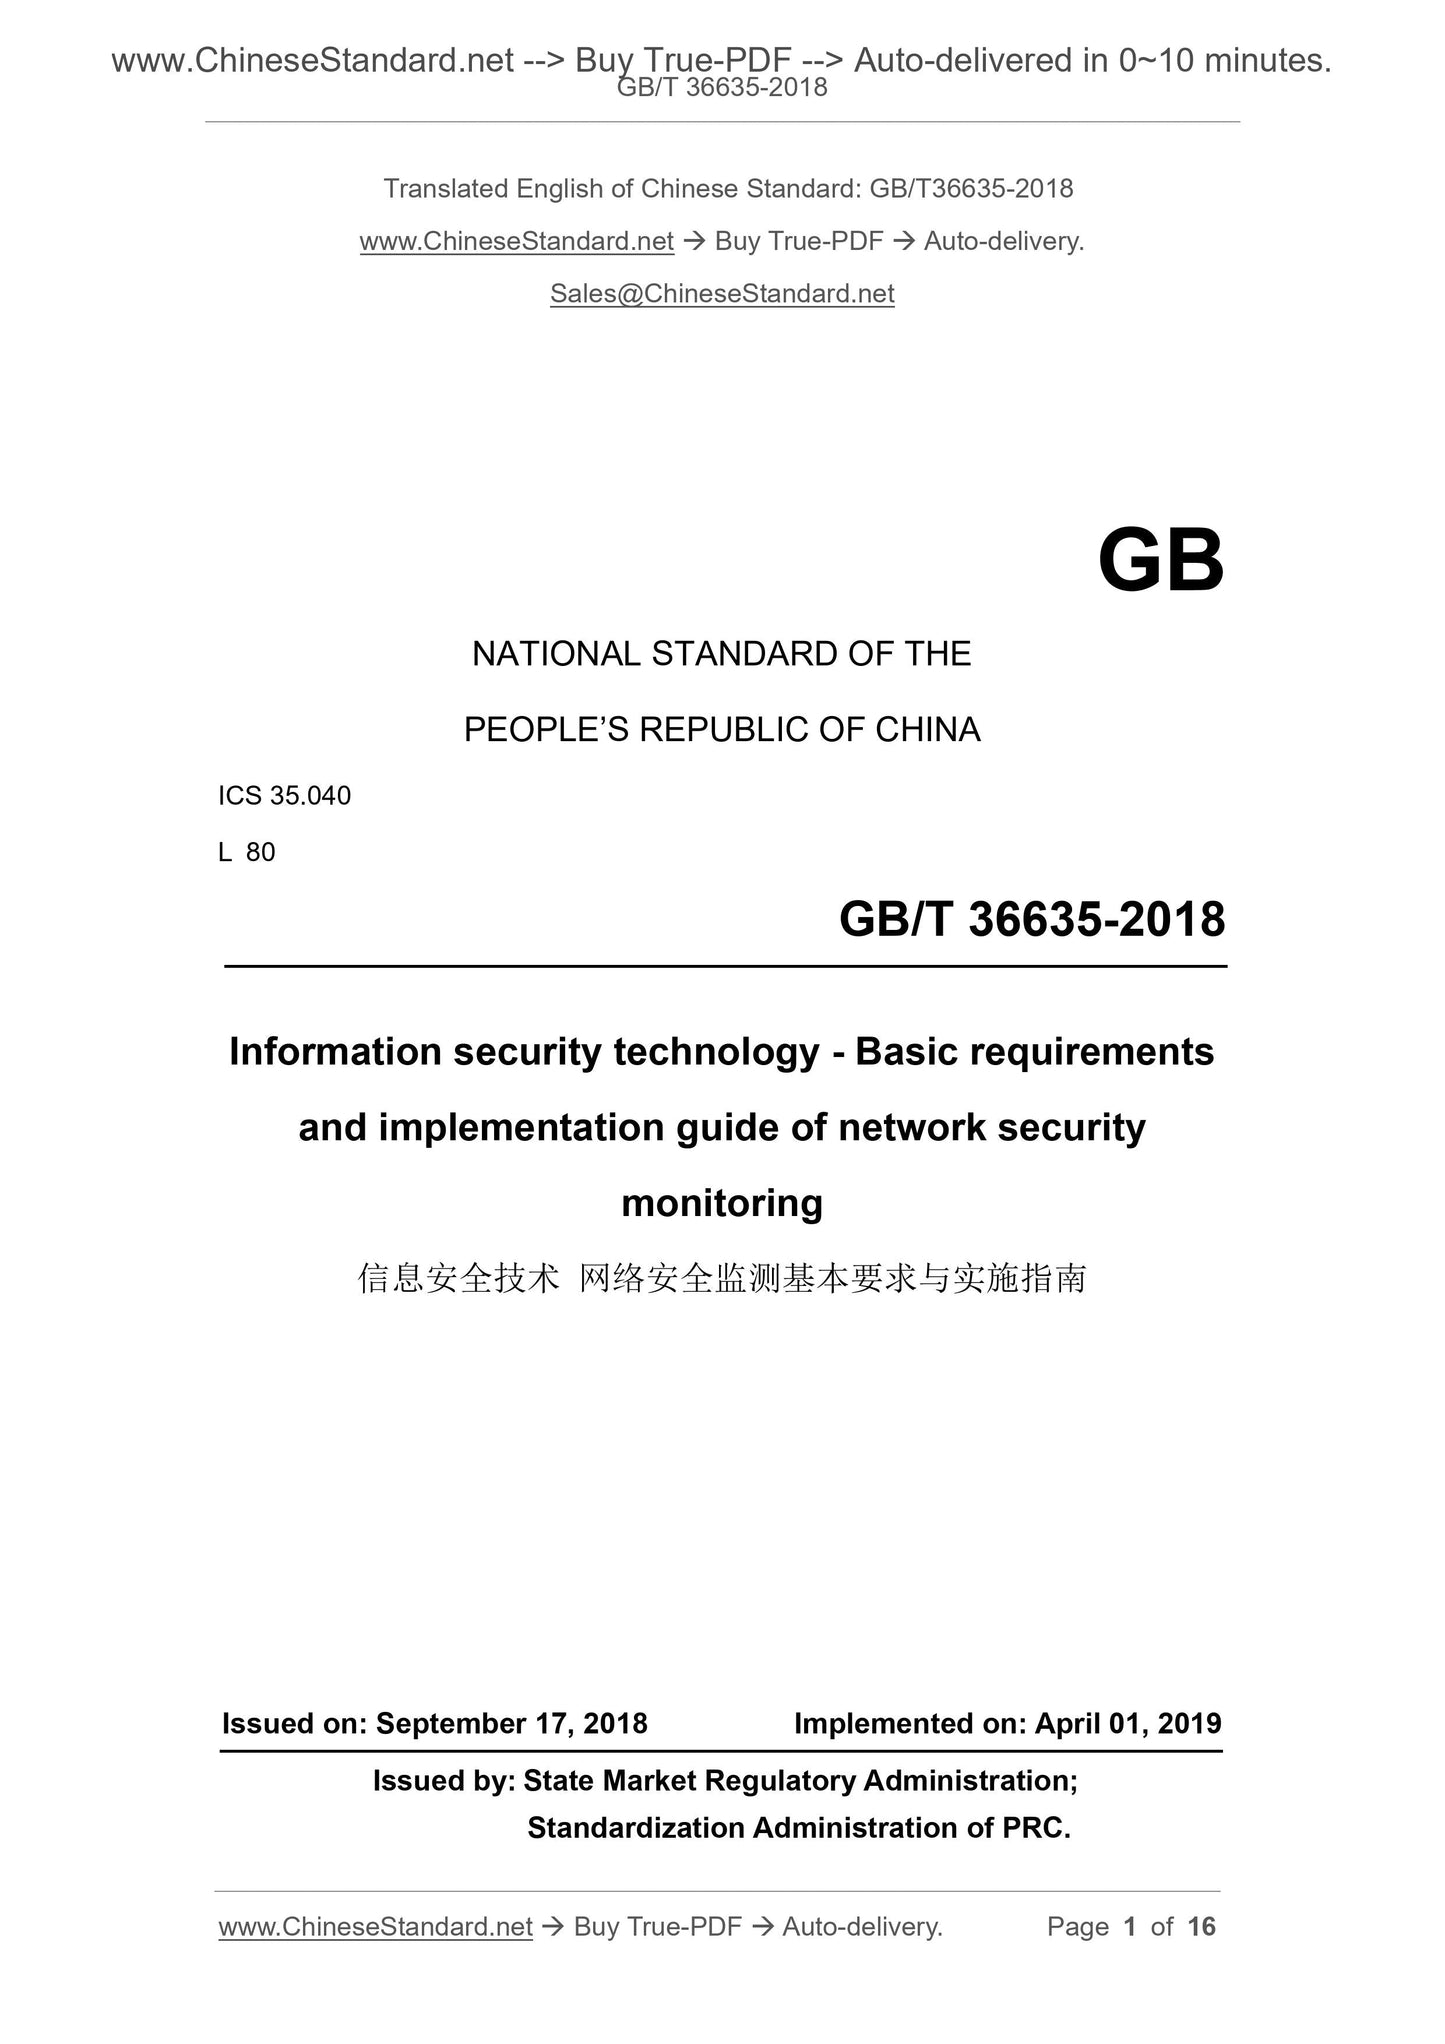 GB/T 36635-2018 Page 1